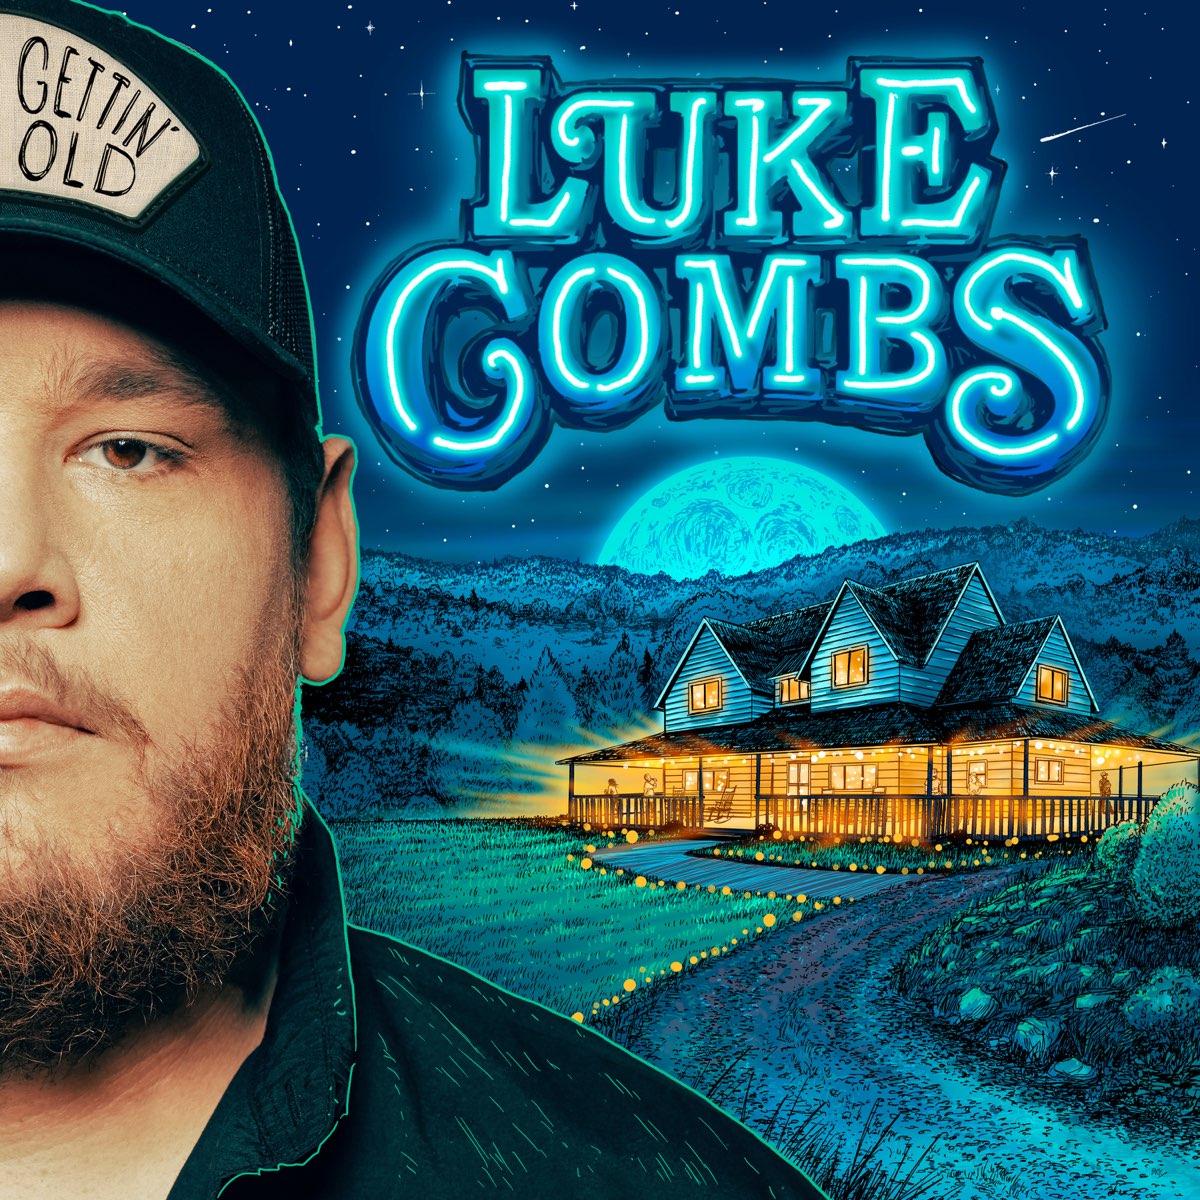 ‎Gettin' Old by Luke Combs on Apple Music